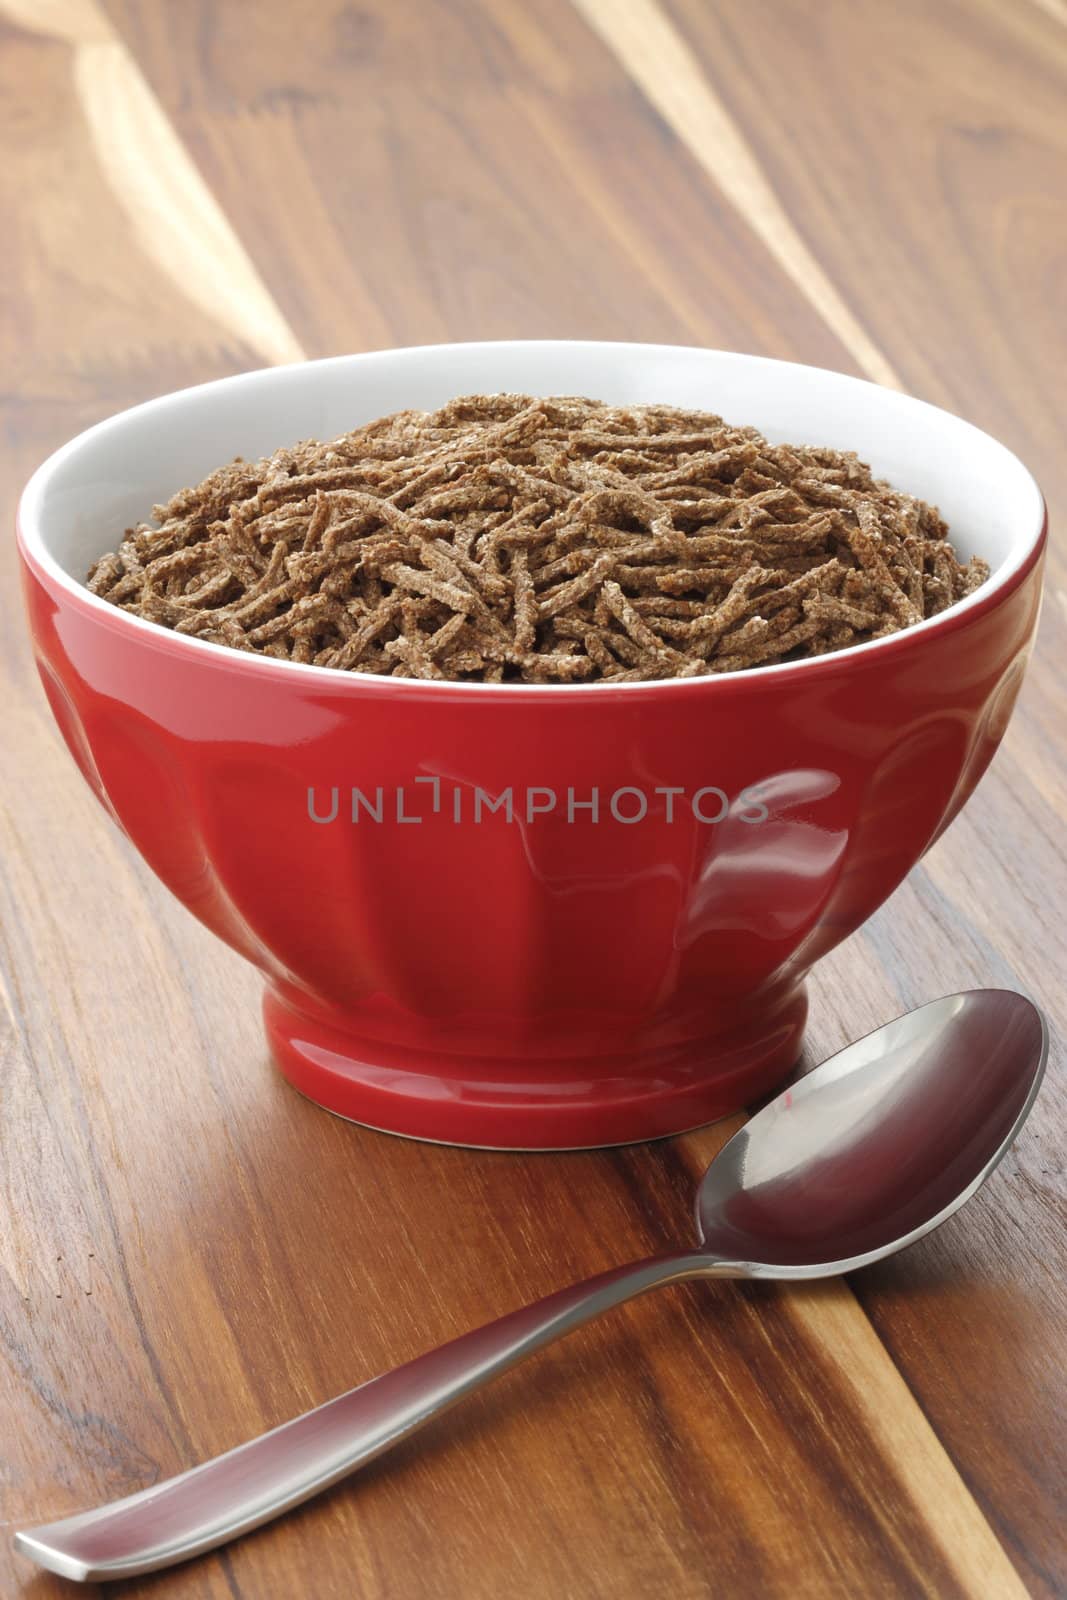 Delicious and nutritious cereal, high in bran, high in fiber, served in a beautiful  French Cafe au Lait Bowl with wide rims. In place of handles. This healthy bran cereal will be an aid to digestive health.